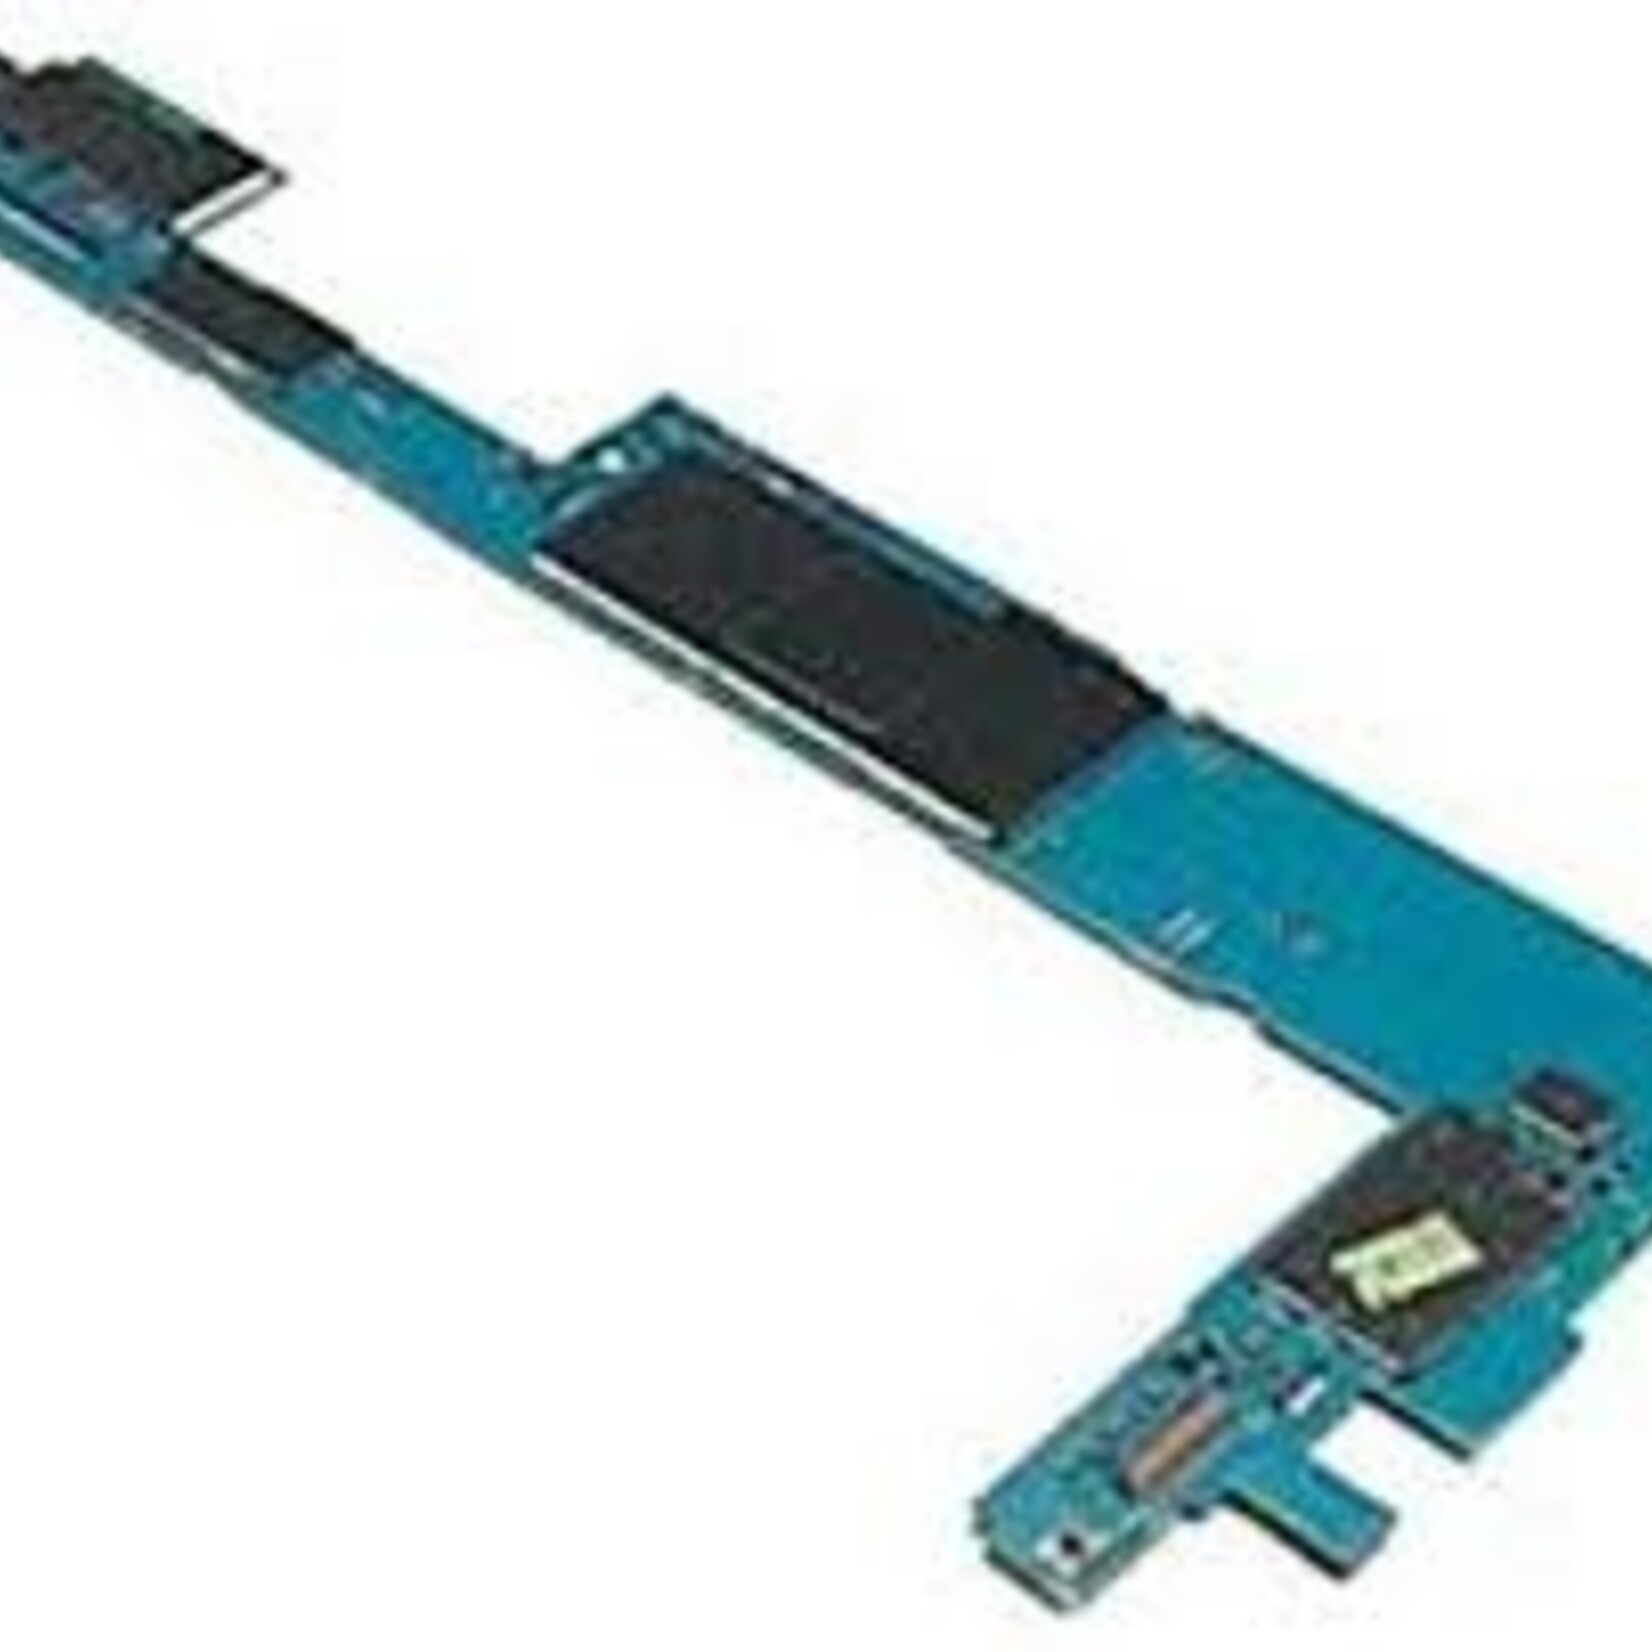 Samsung MOTHERBOARD FOR SAMSUNG TAB S2 9.7" SM-T810 T810